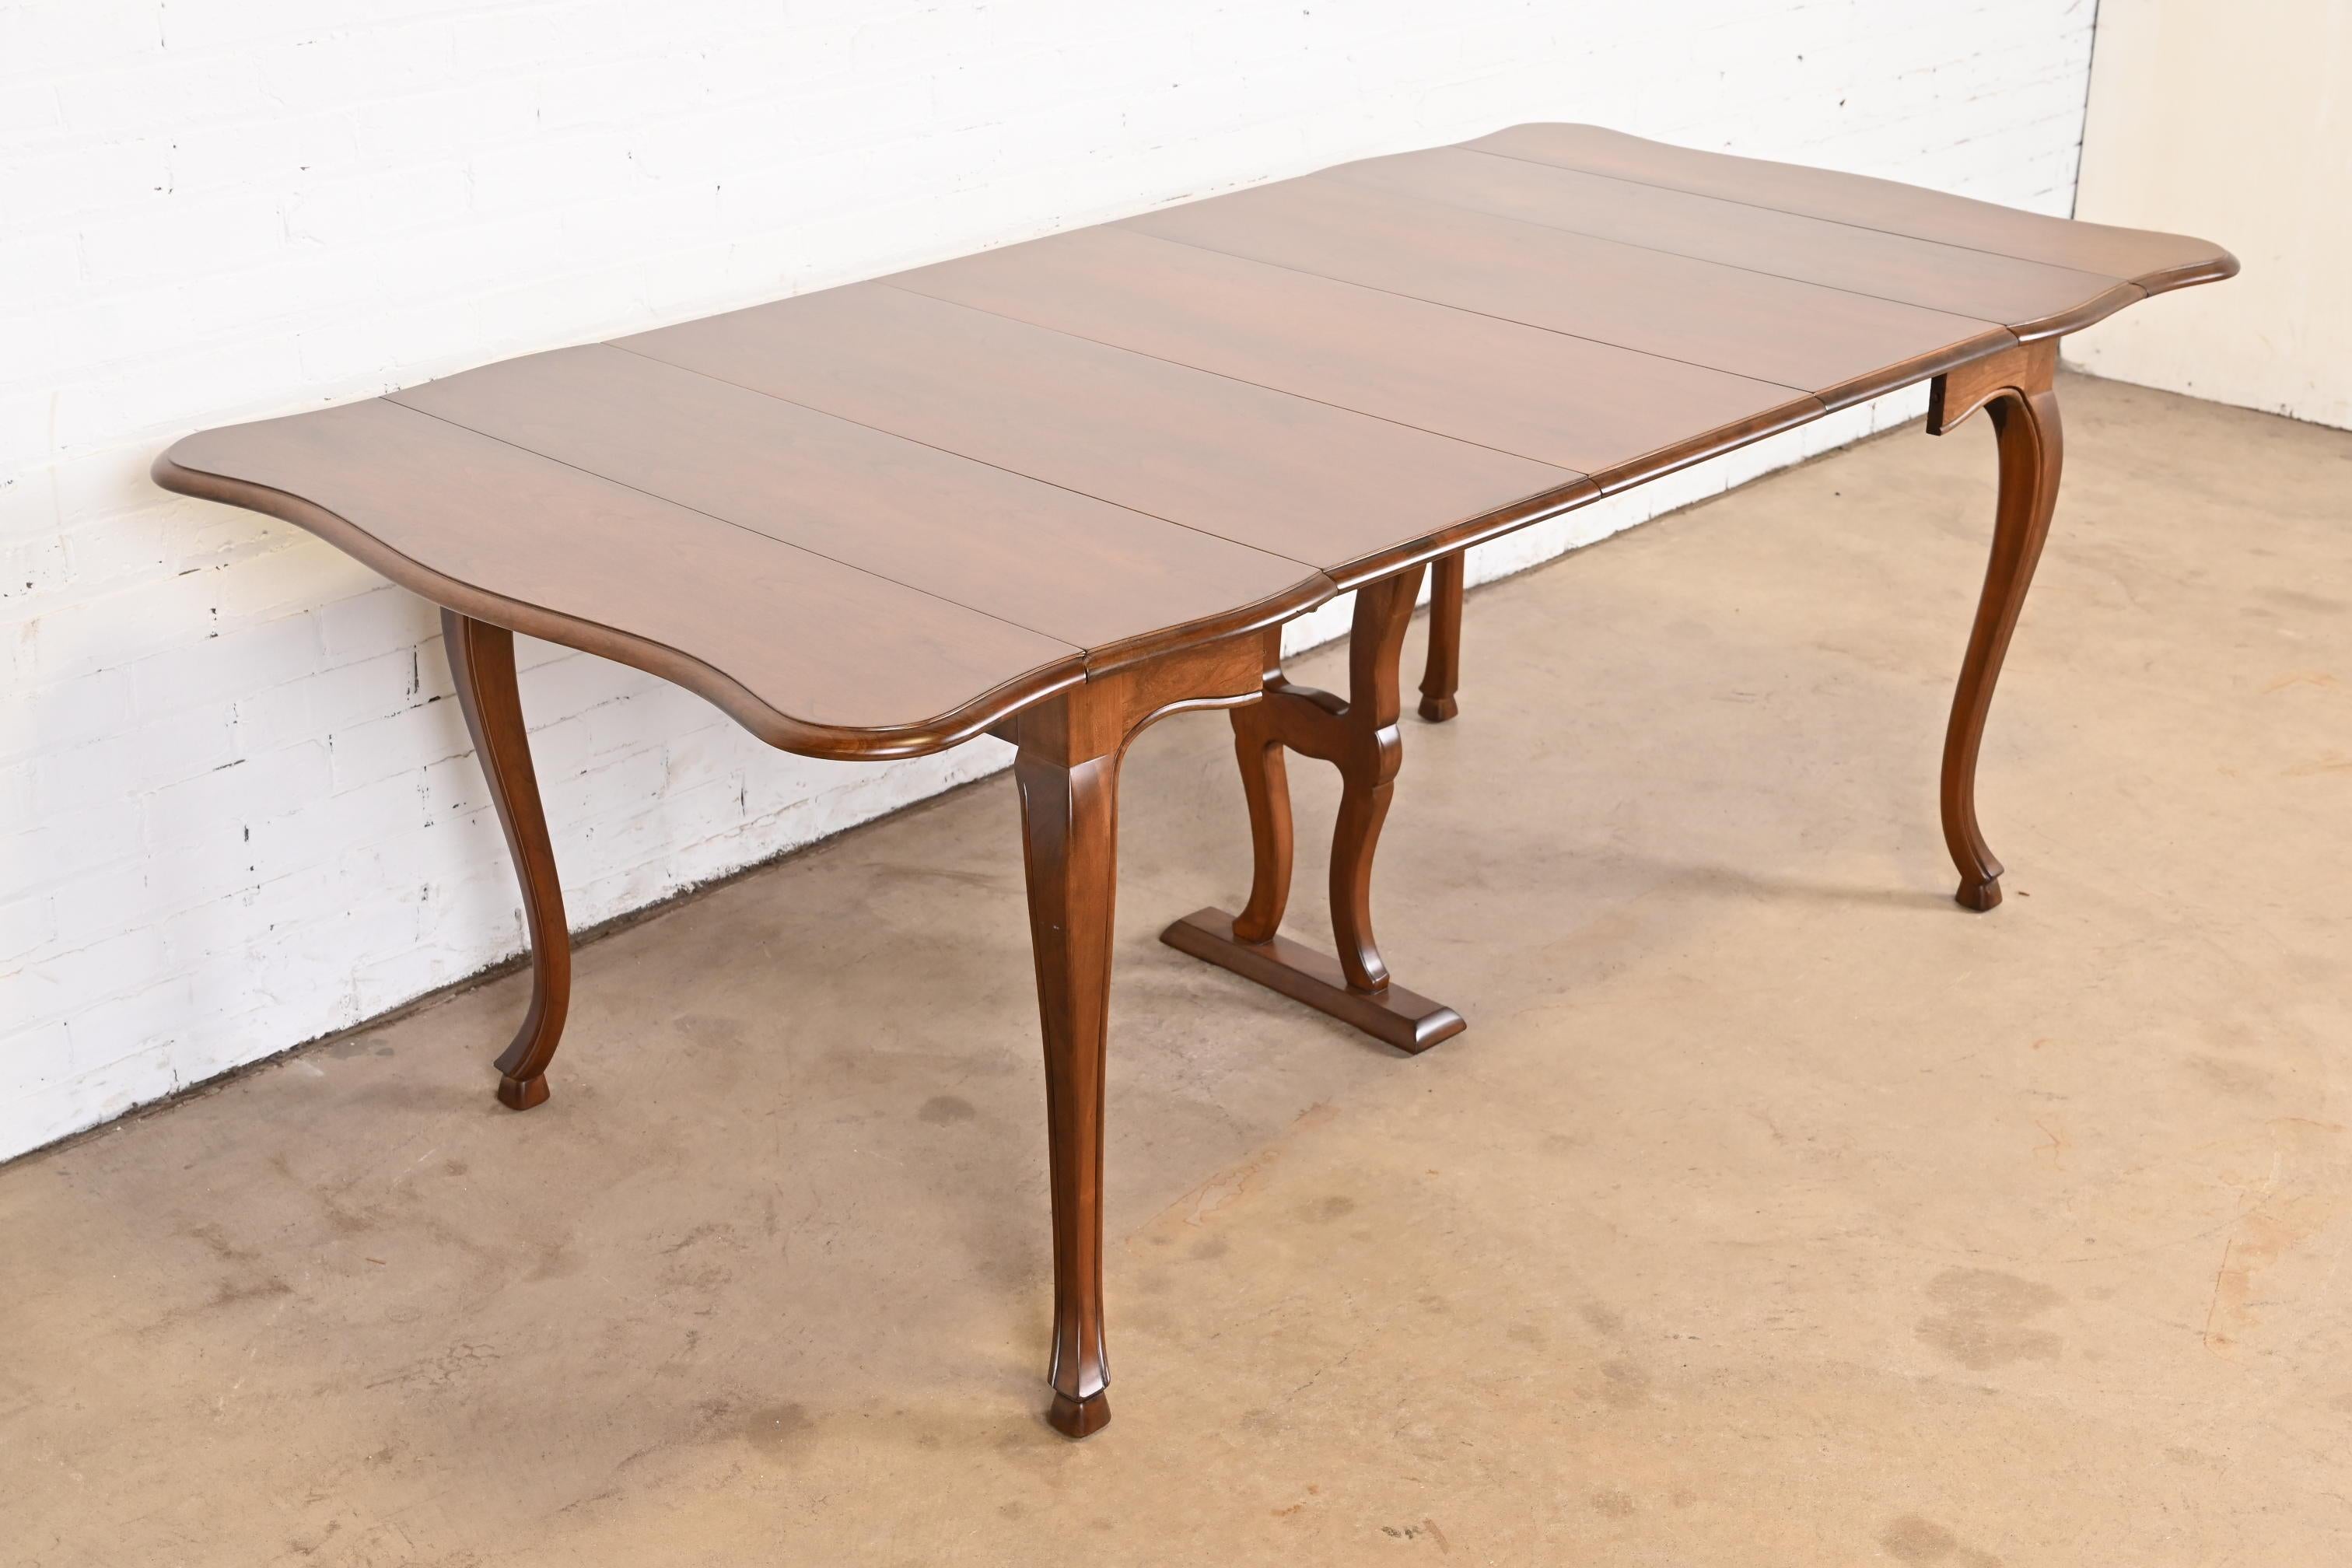 Mid-20th Century John Widdicomb French Provincial Cherry Wood Dining Table, Newly Refinished For Sale